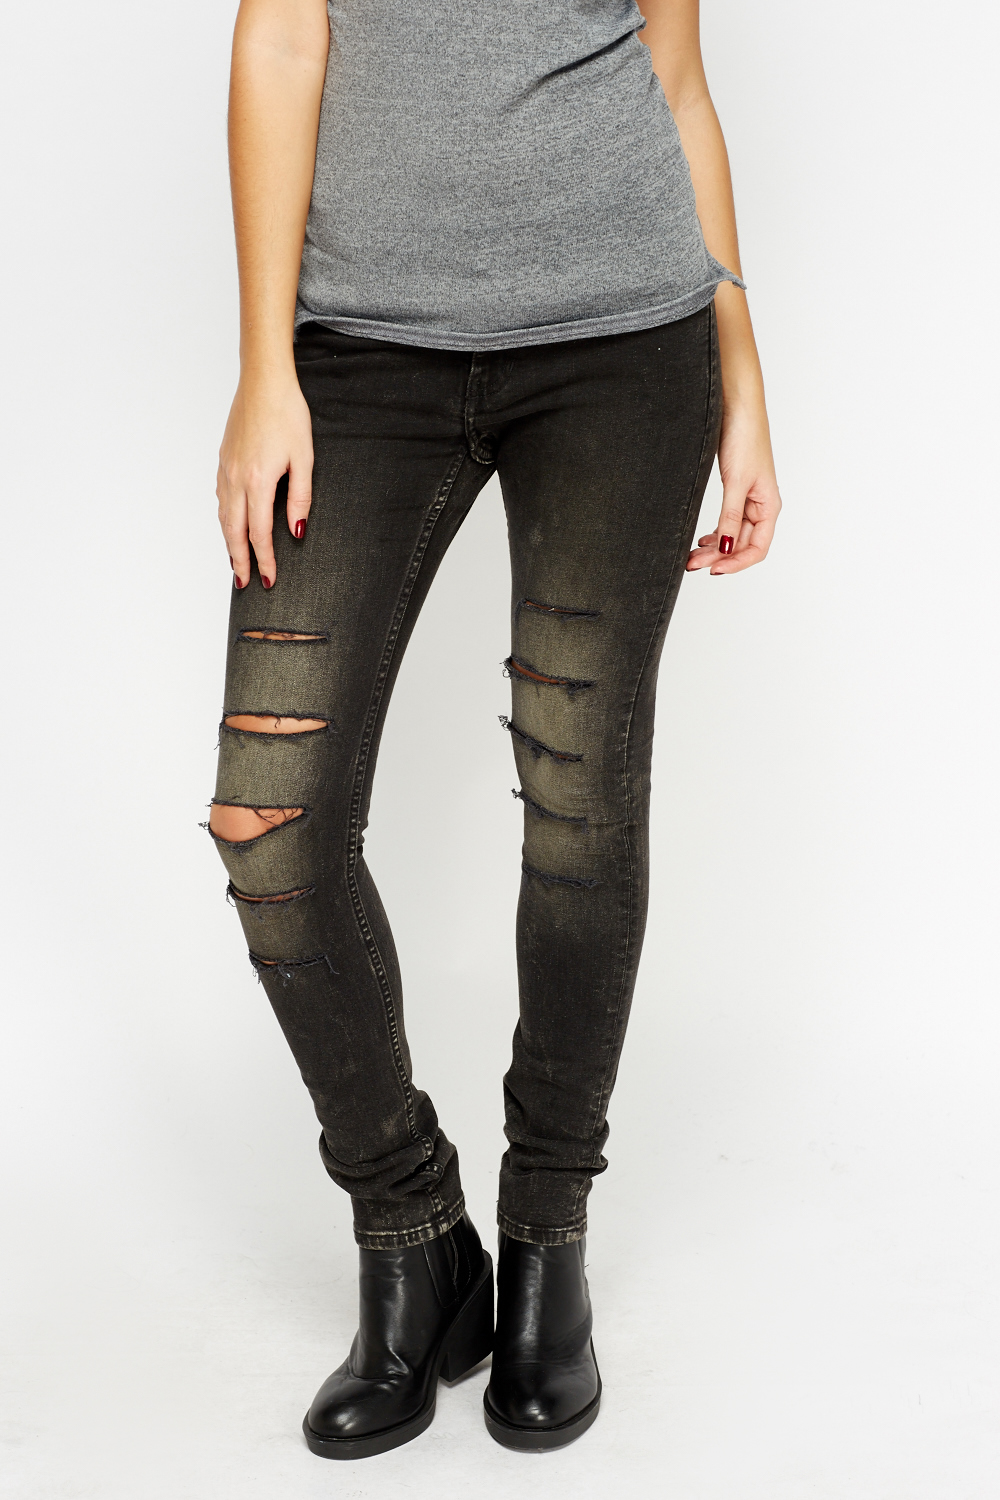 Ripped Black Jeans